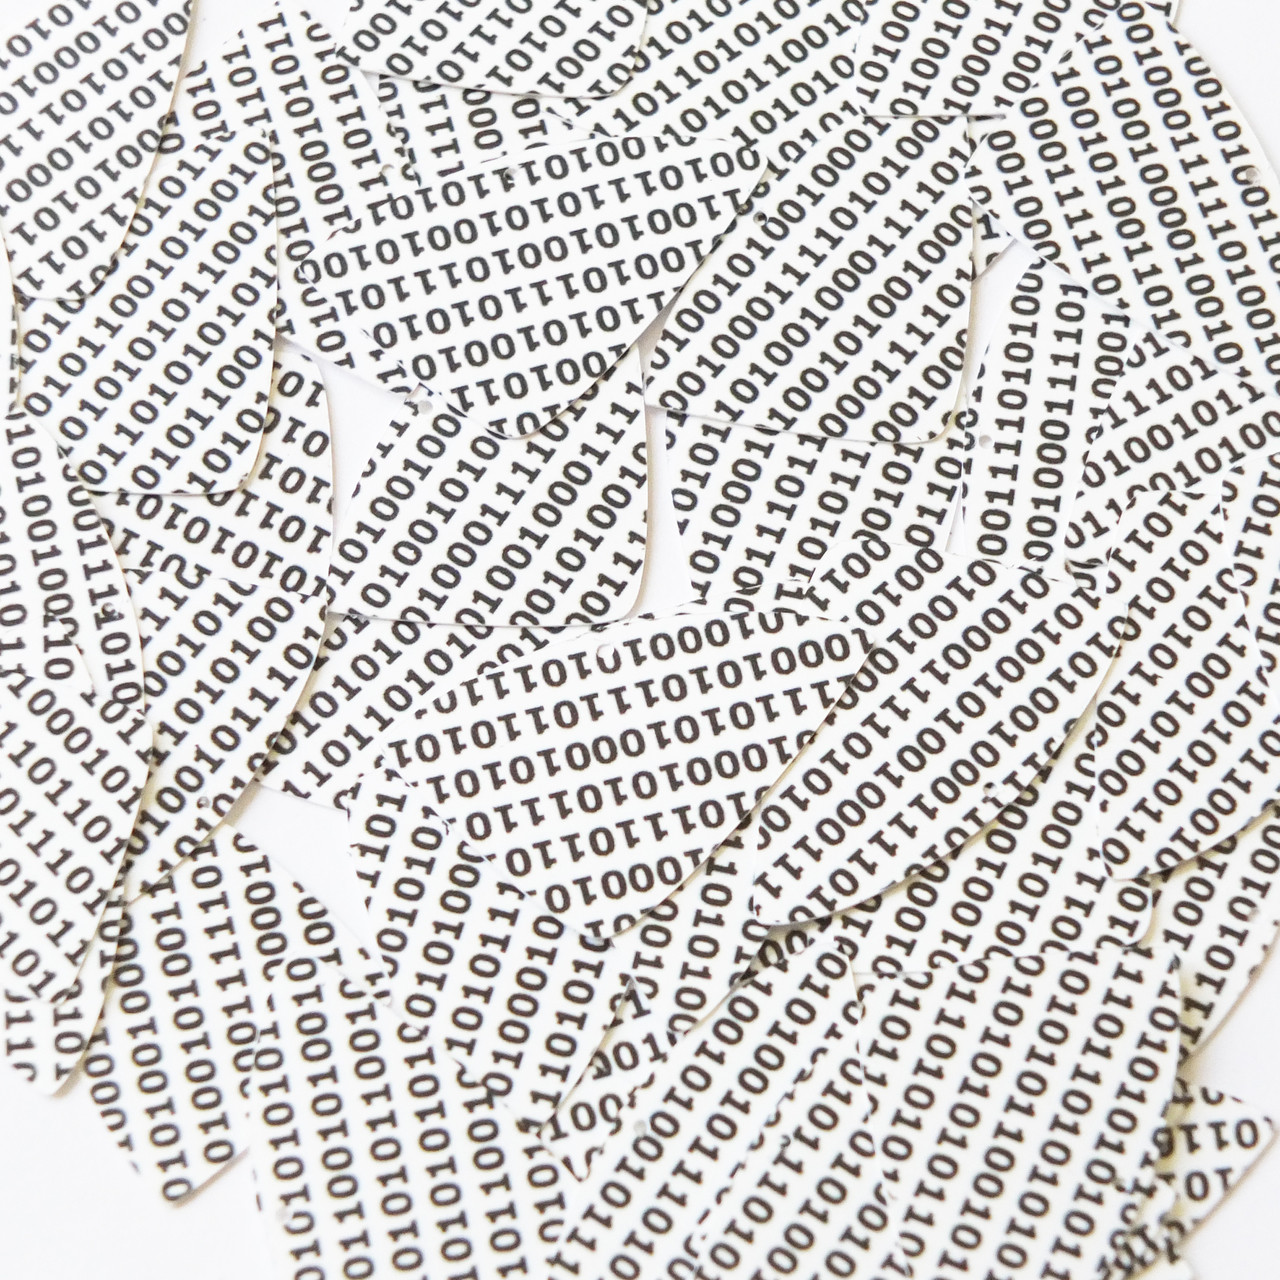 Fishscale Fin Sequins 1.5" Black White Binary Tech Code Print Out Opaque